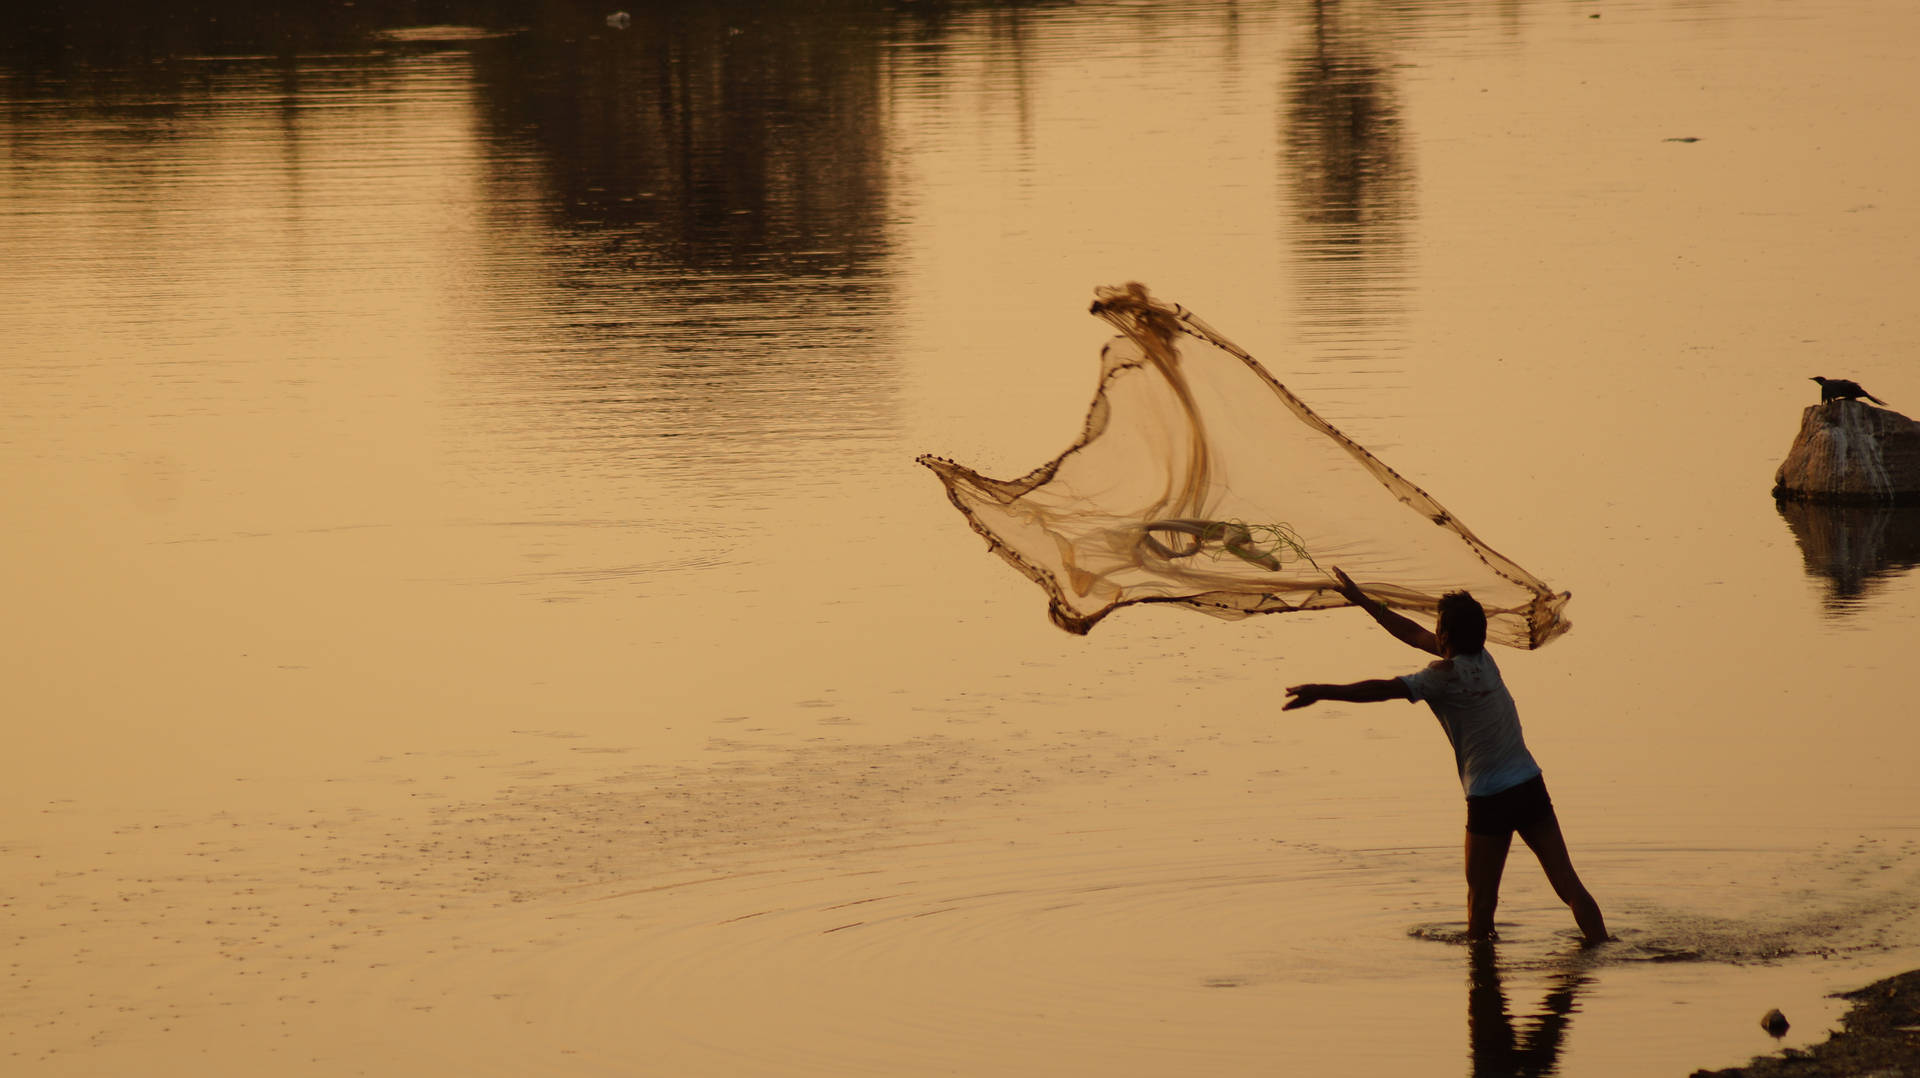 A Man Spreads A Fishing Net To Haul In The Morning's Catch. Background